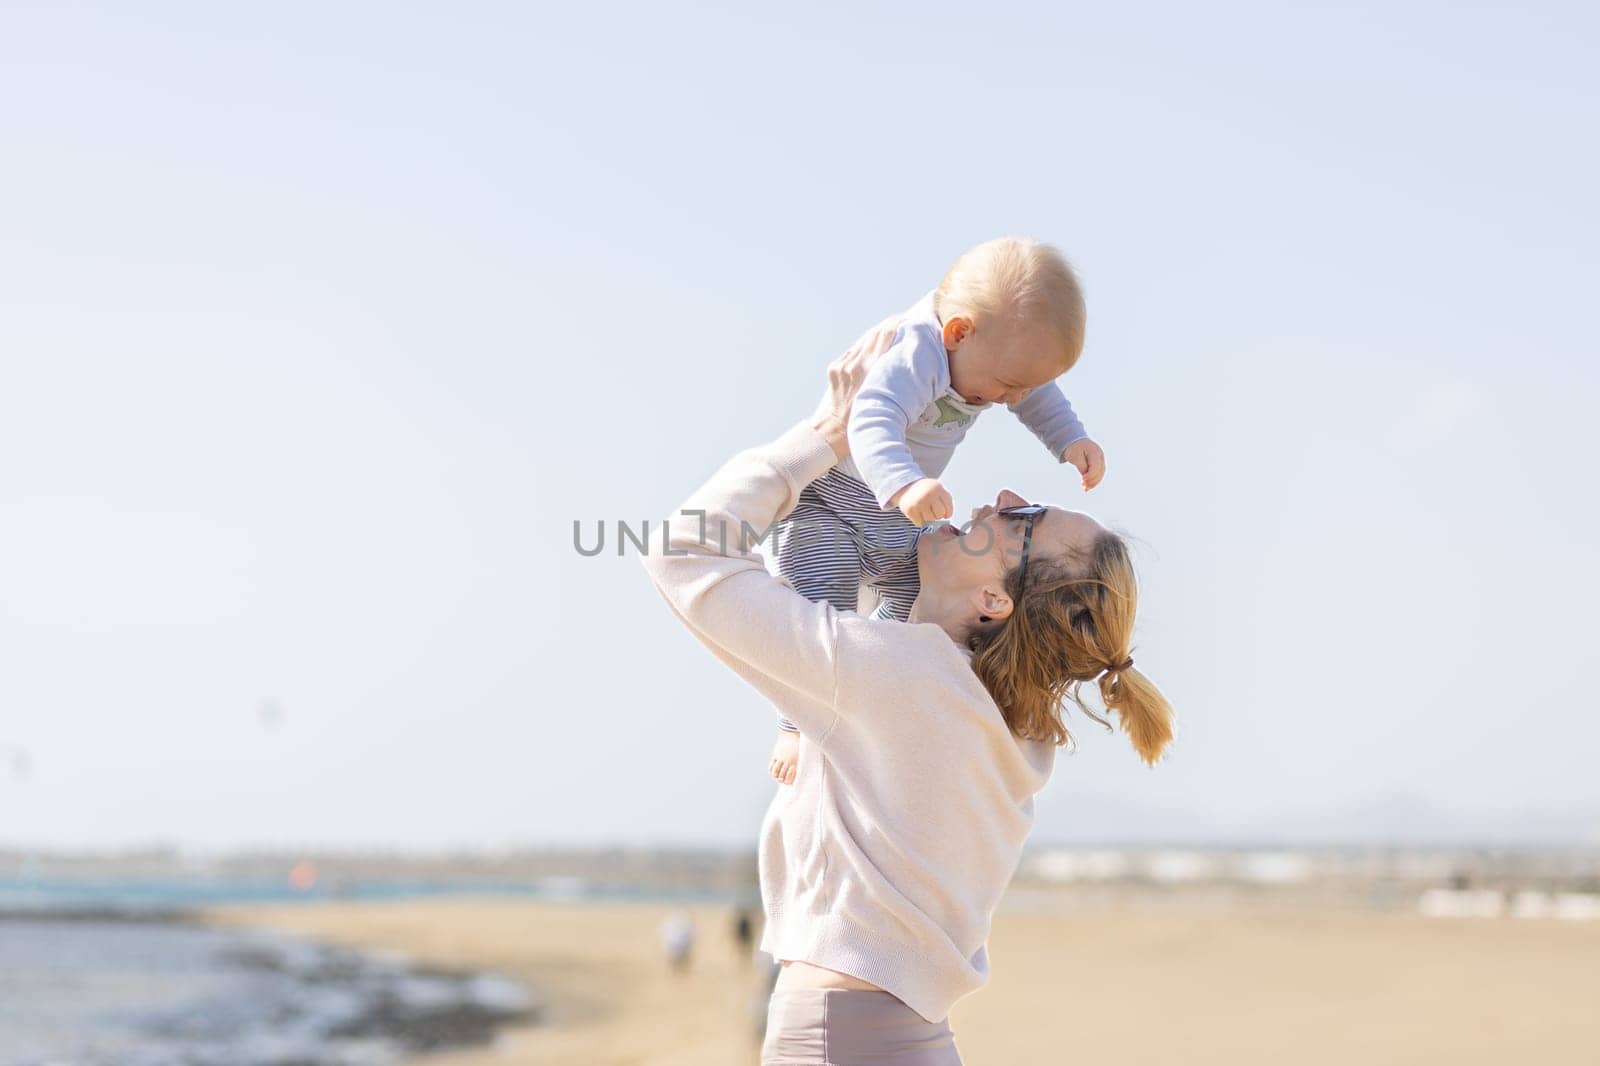 Mother enjoying summer vacations holding, playing and lifting his infant baby boy son high in the air on sandy beach on Lanzarote island, Spain. Family travel and vacations concept. by kasto